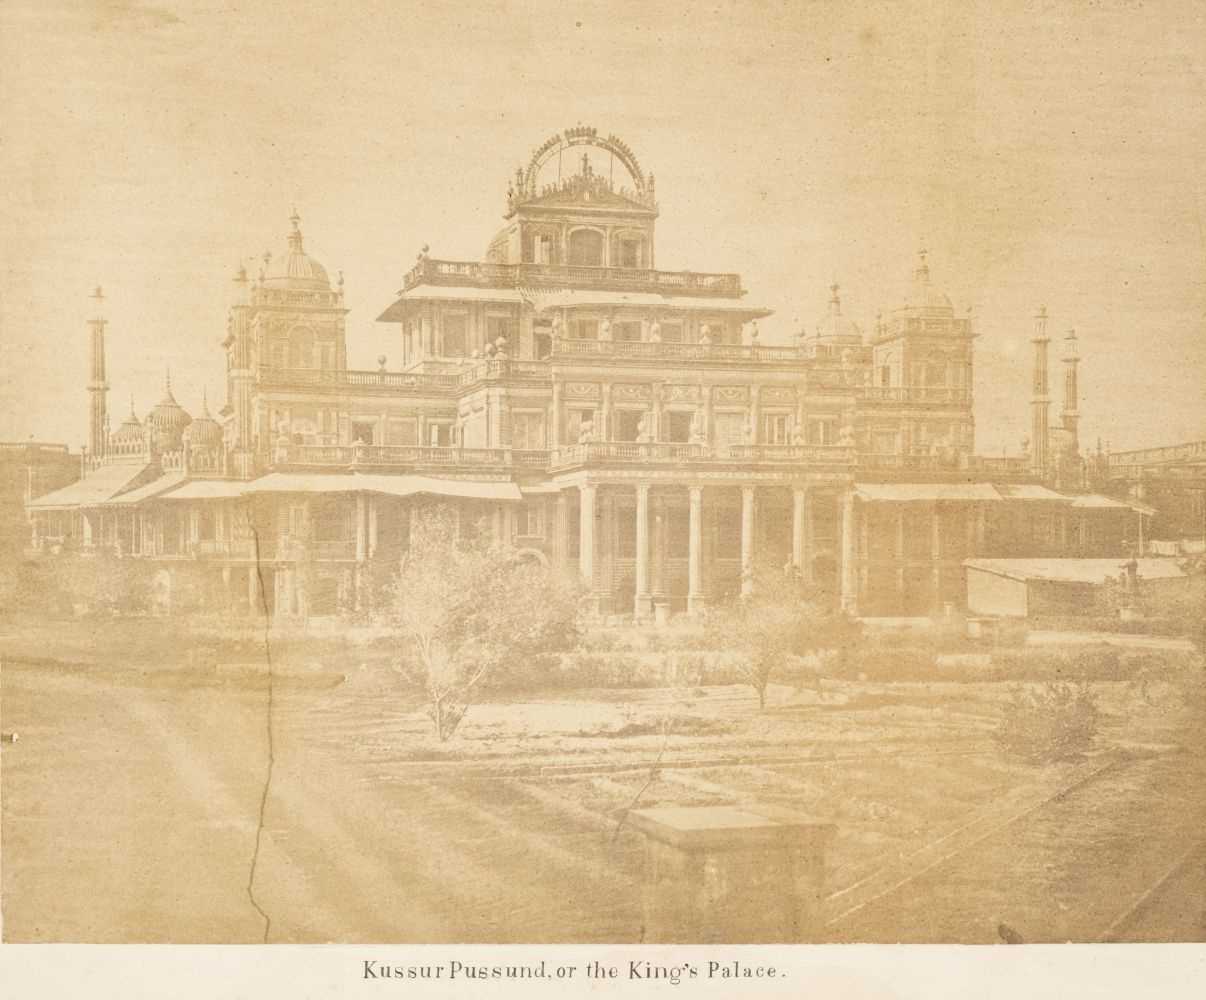 Lot 108 - India. Kussur Pusund, or The King's Palace, Lucknow, c. 1860, mammoth salt print laid on card